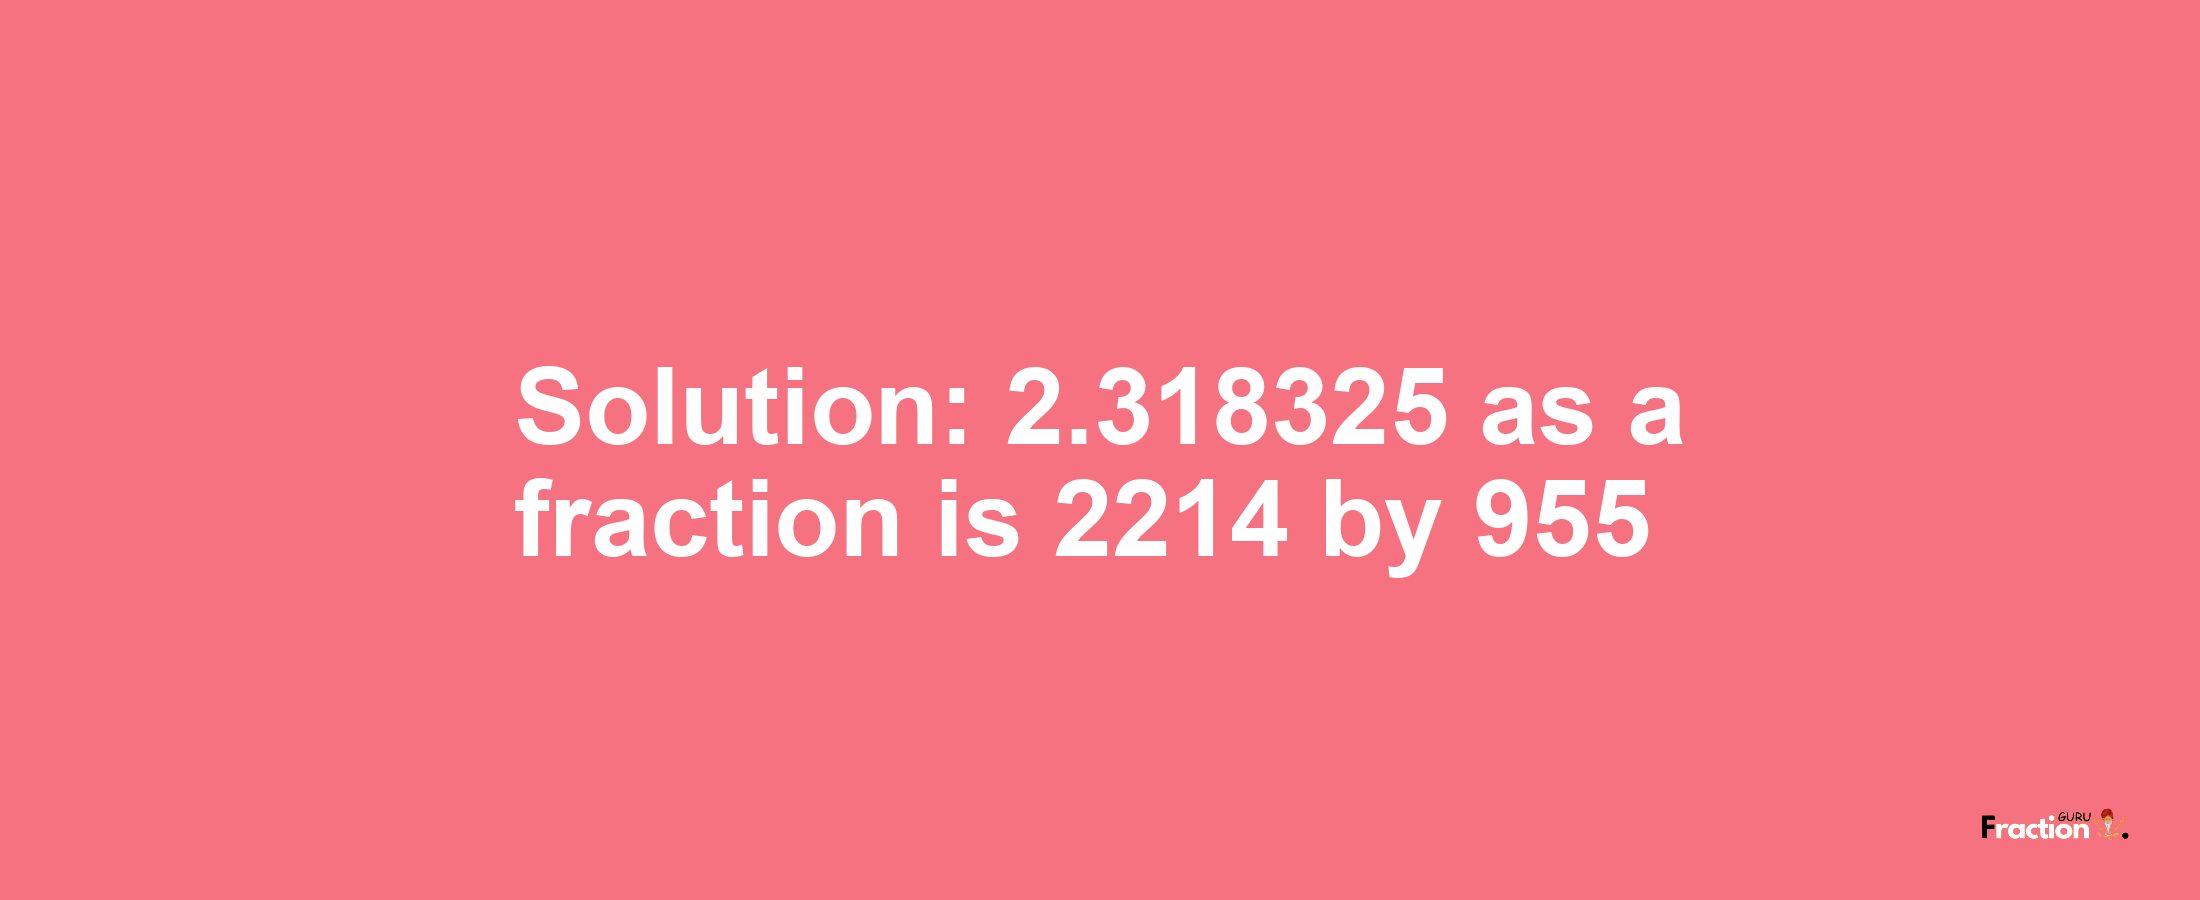 Solution:2.318325 as a fraction is 2214/955